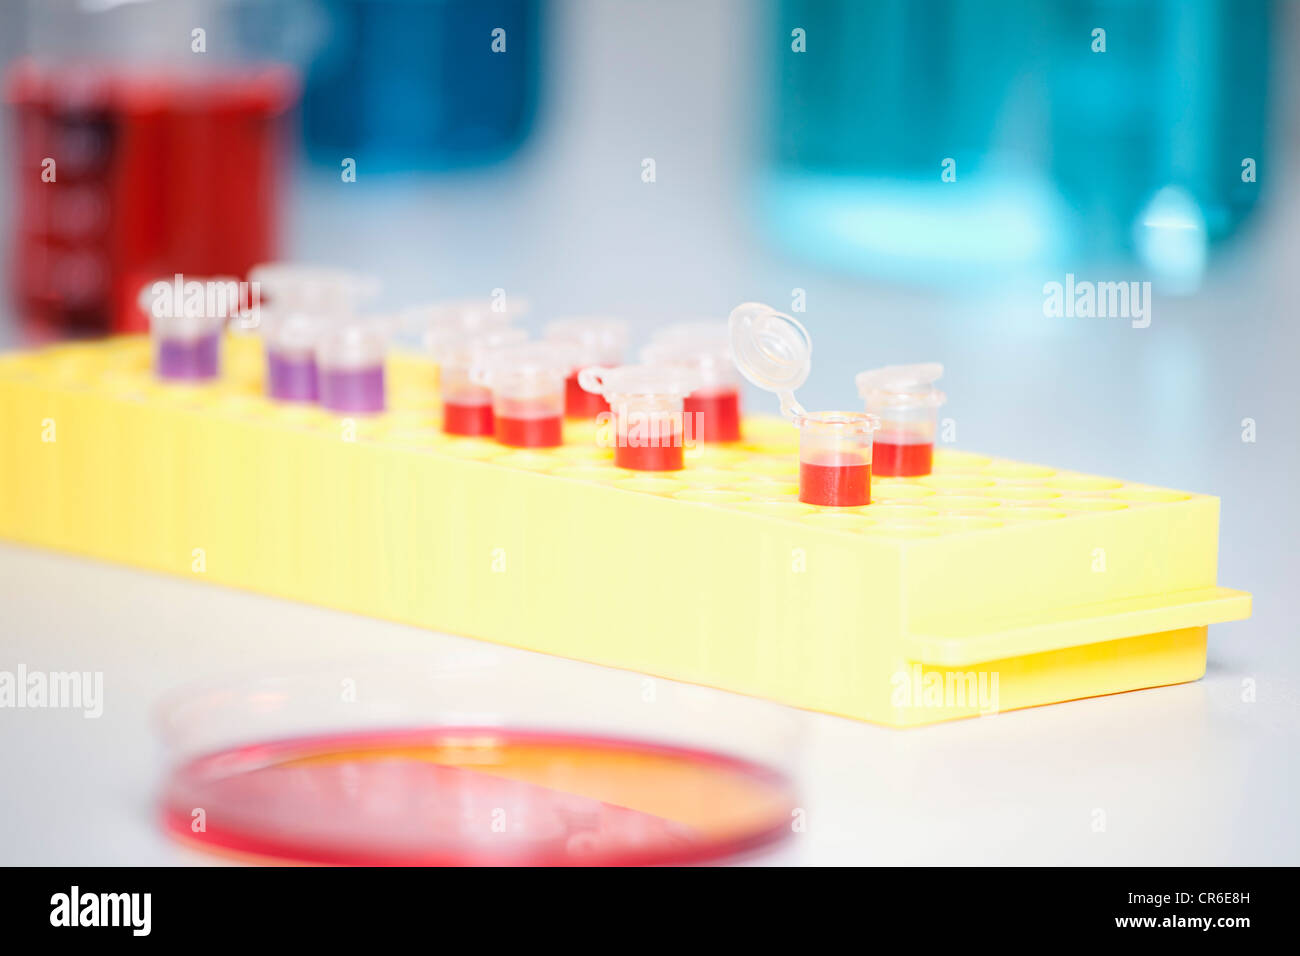 Germany, Bavaria, Munich, Test tubes and petri dishes for medical research in laboratory Stock Photo